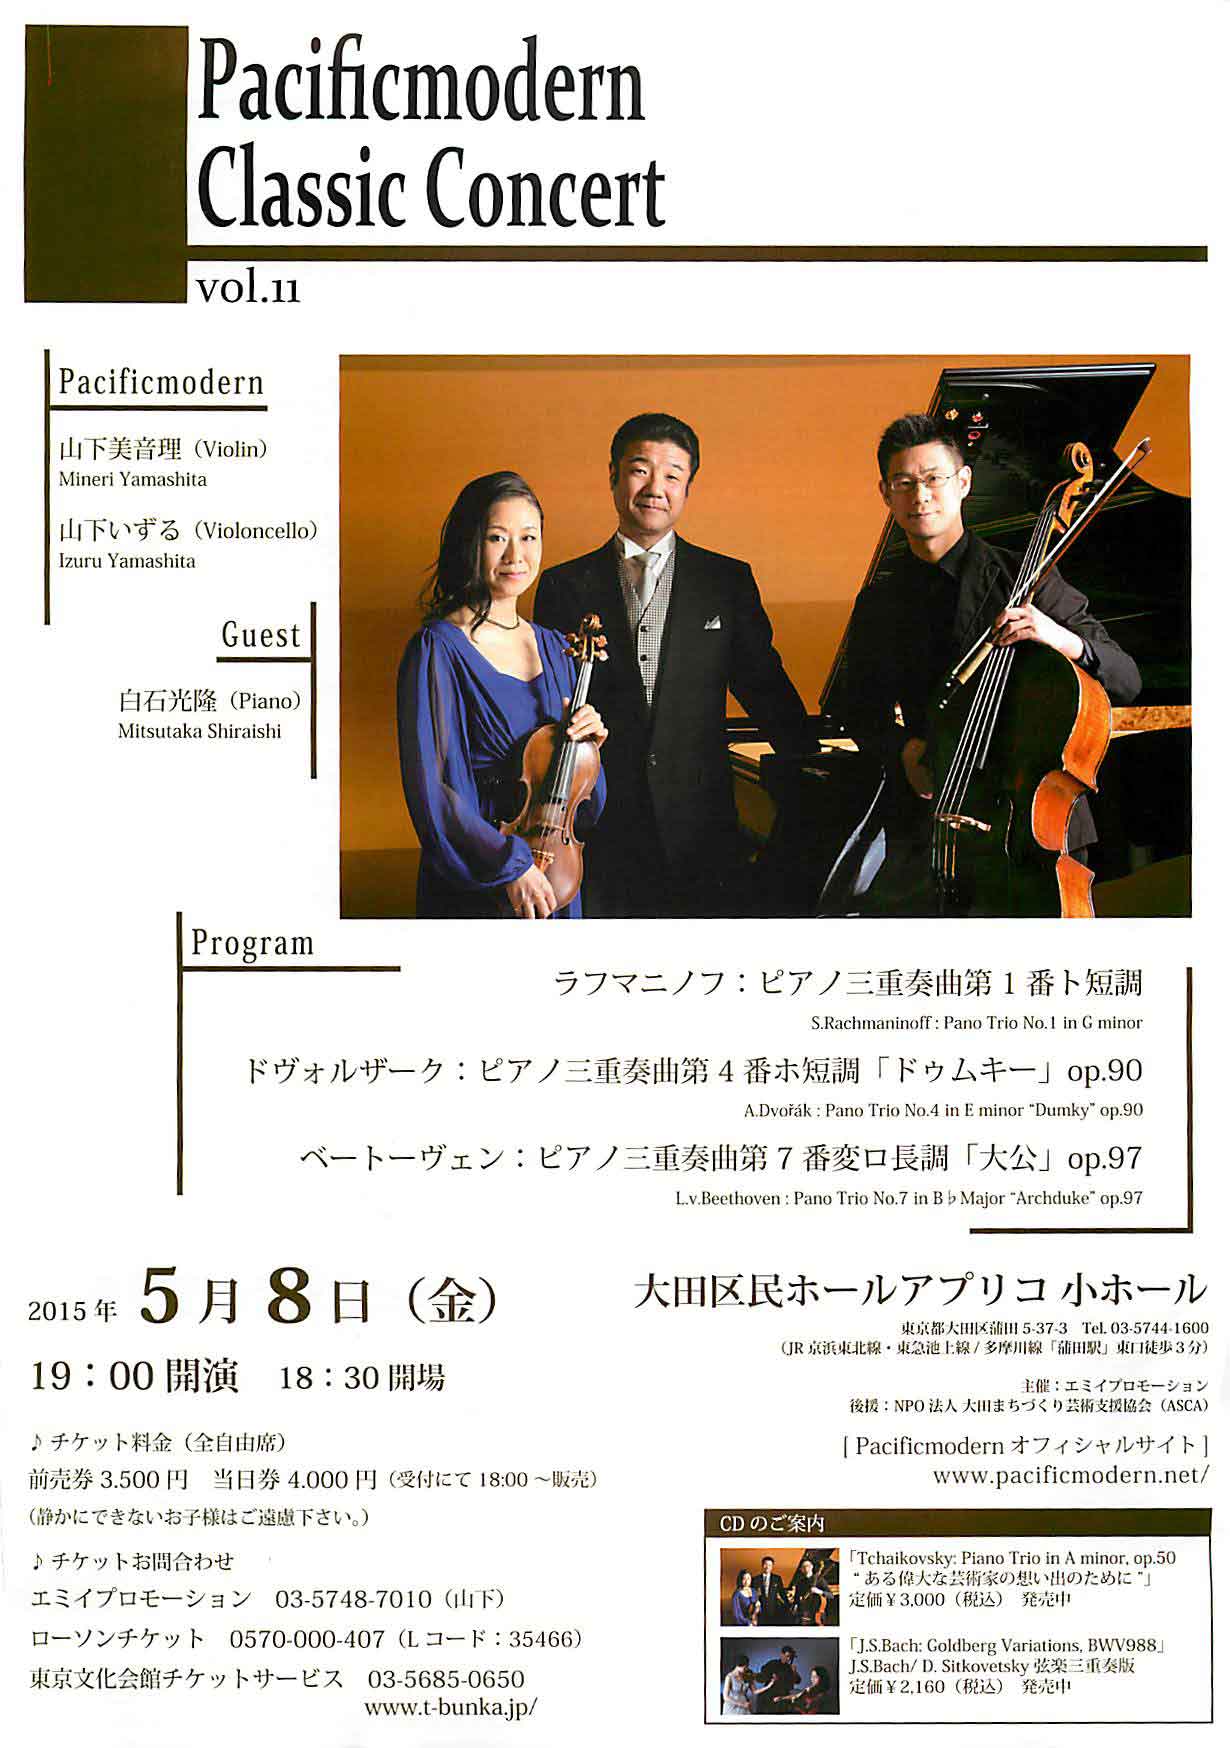 Pacificmodern Classic Concert